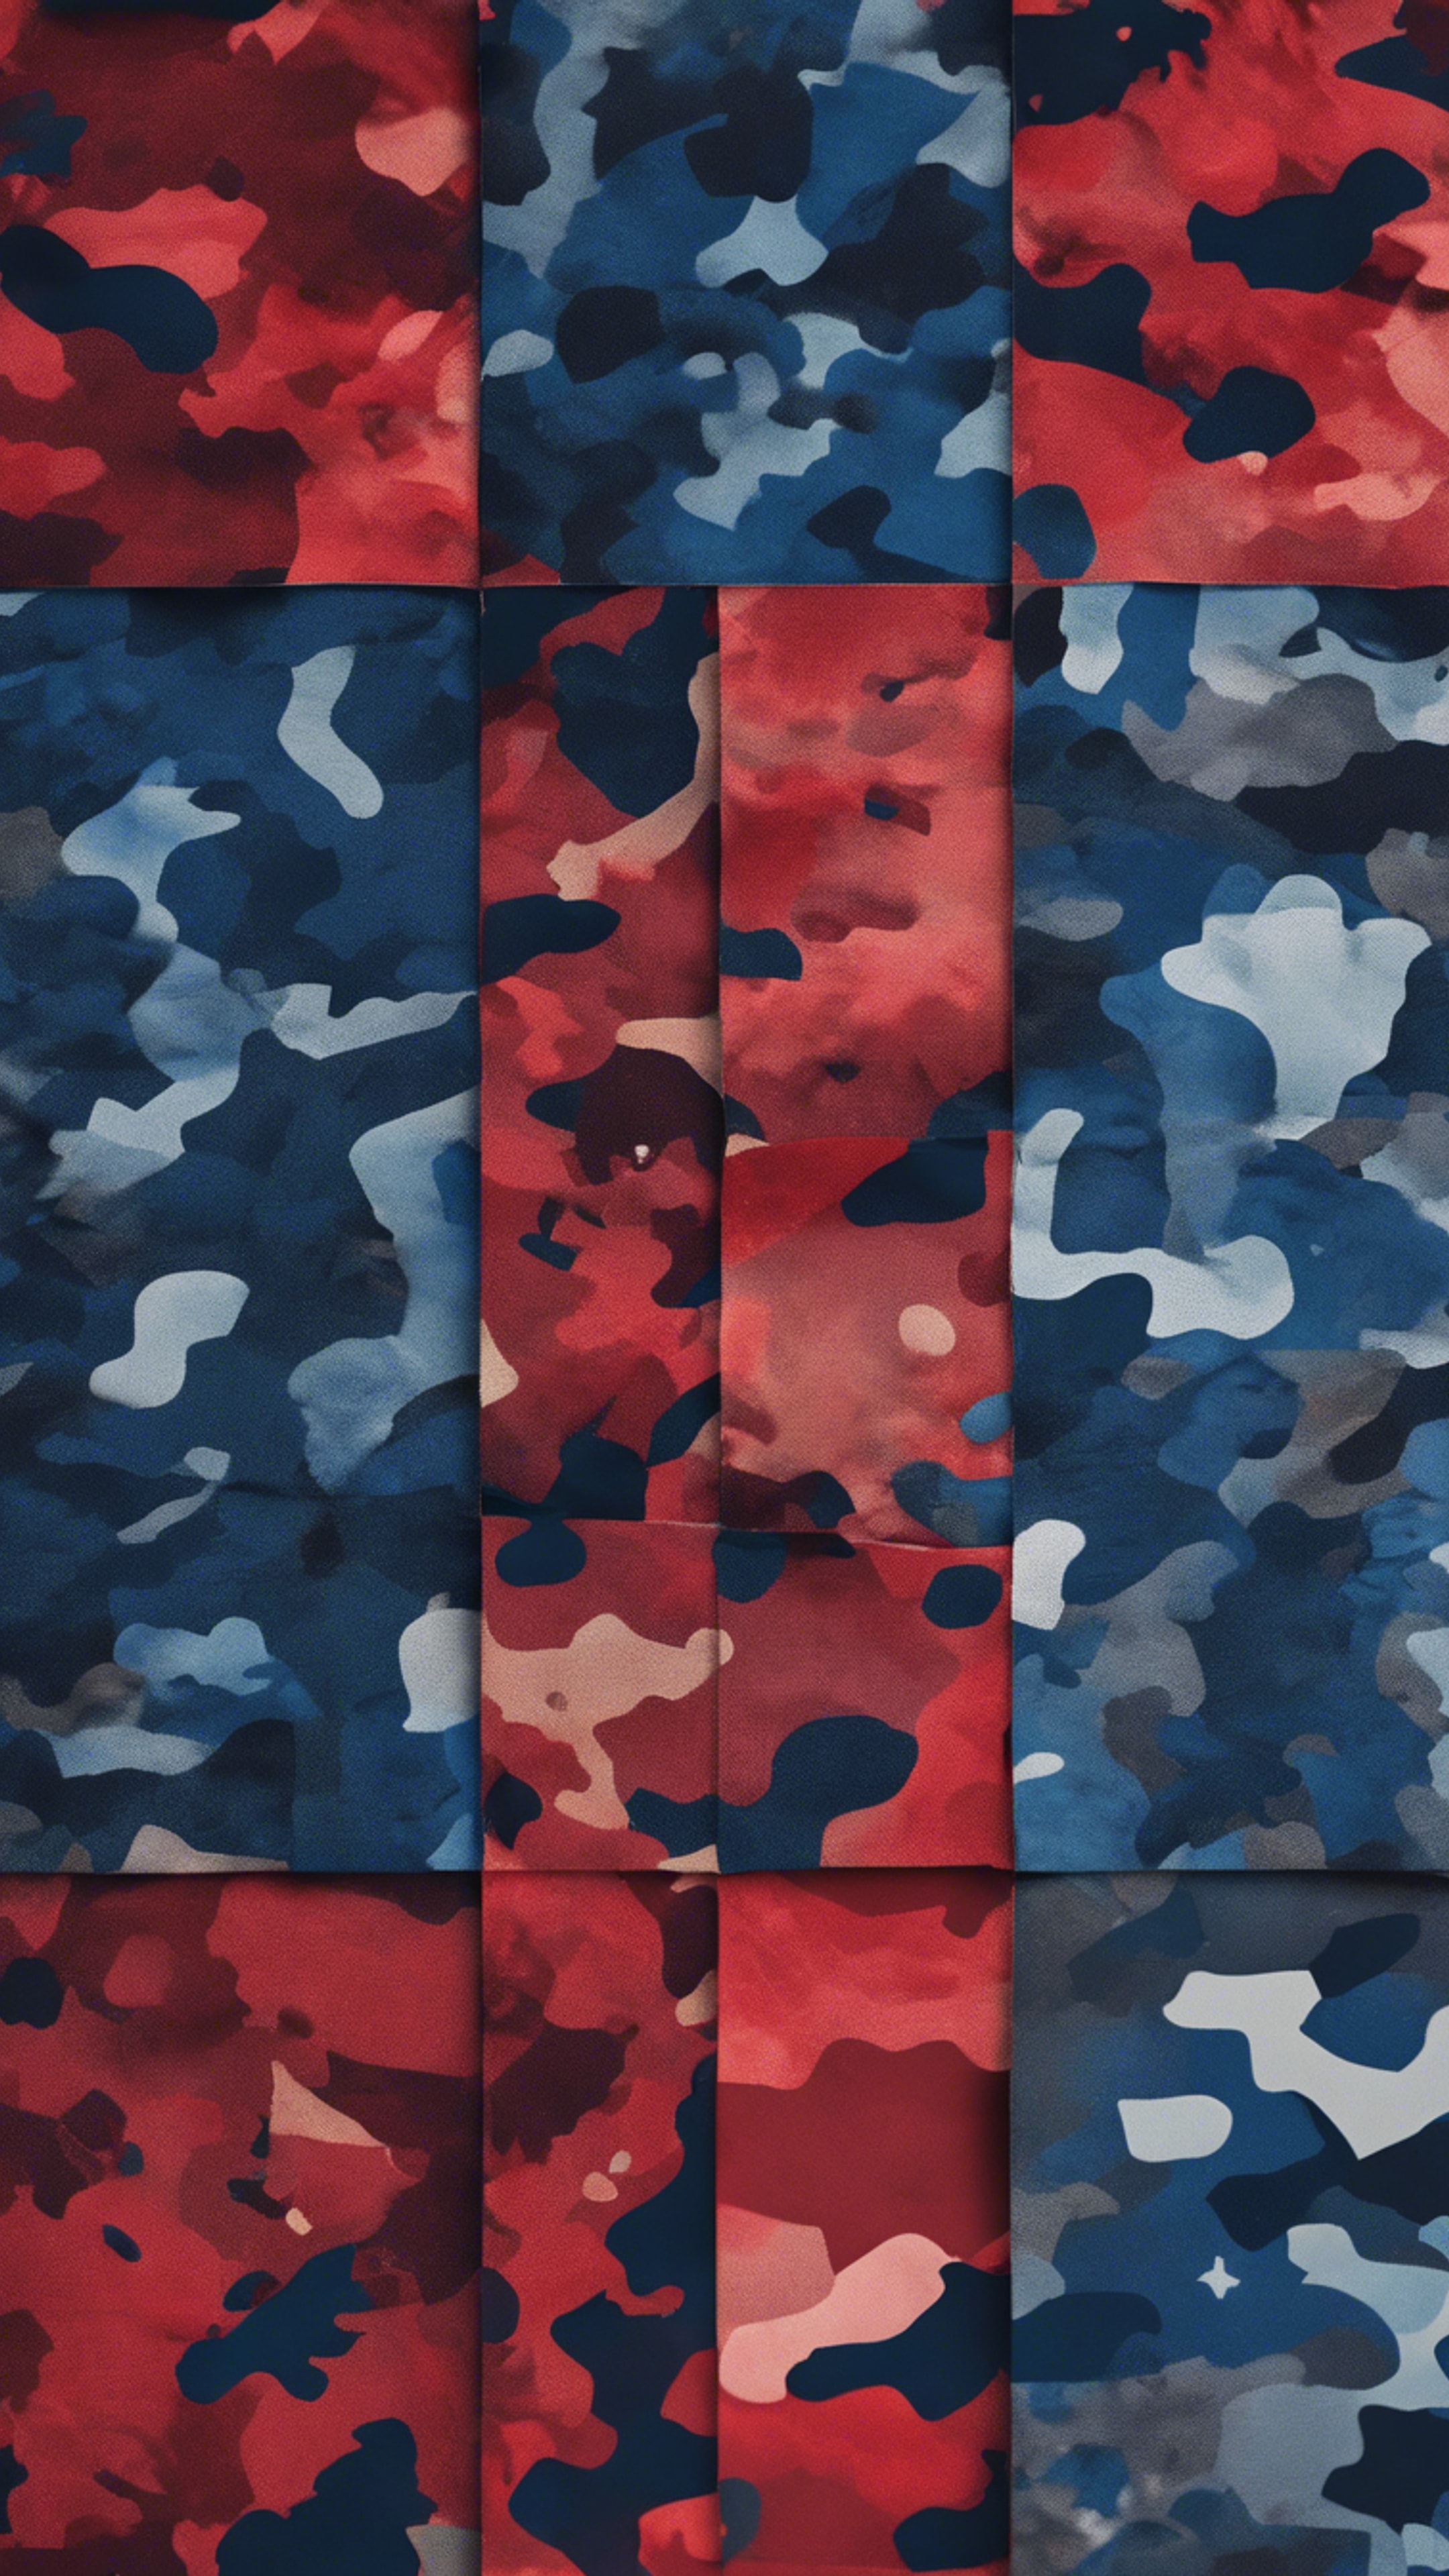 Wide patches of red and blue in a modernized camouflage pattern. Тапет[bf2d18a8e46c447ea6e3]